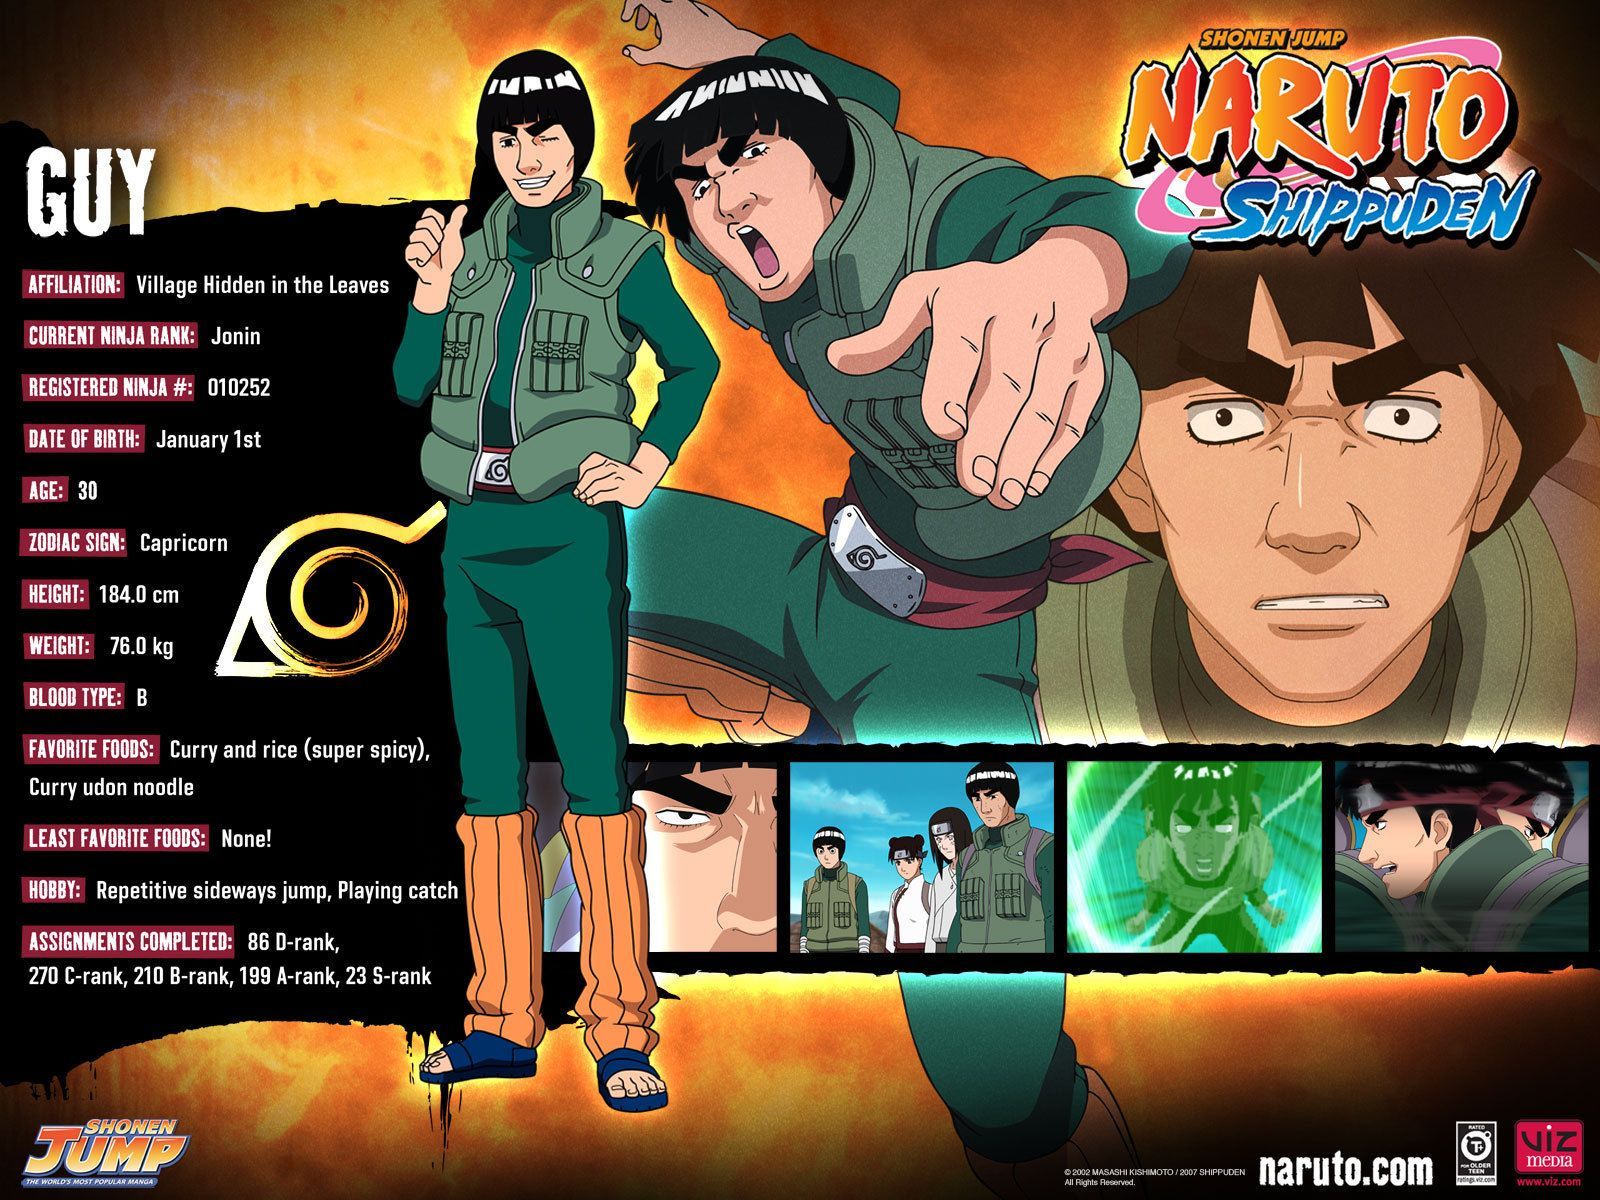 Gallery for - naruto shippuden character wallpaper